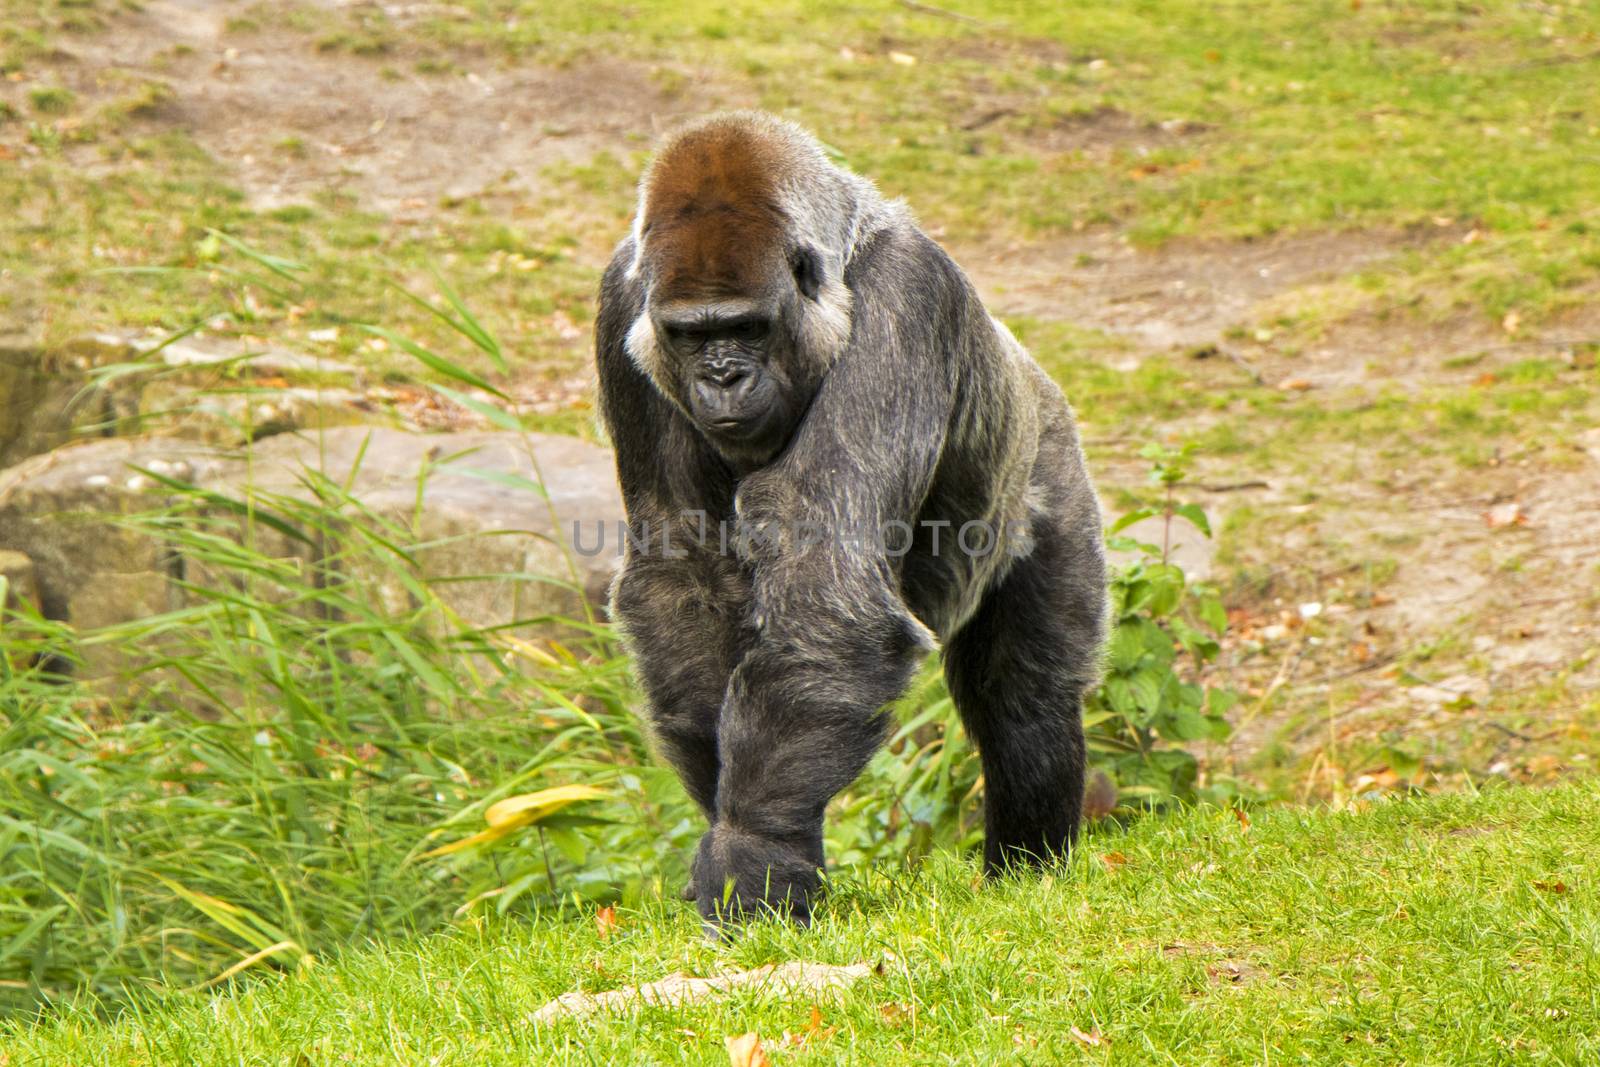 Gorilla in the Zoo by Taidundua